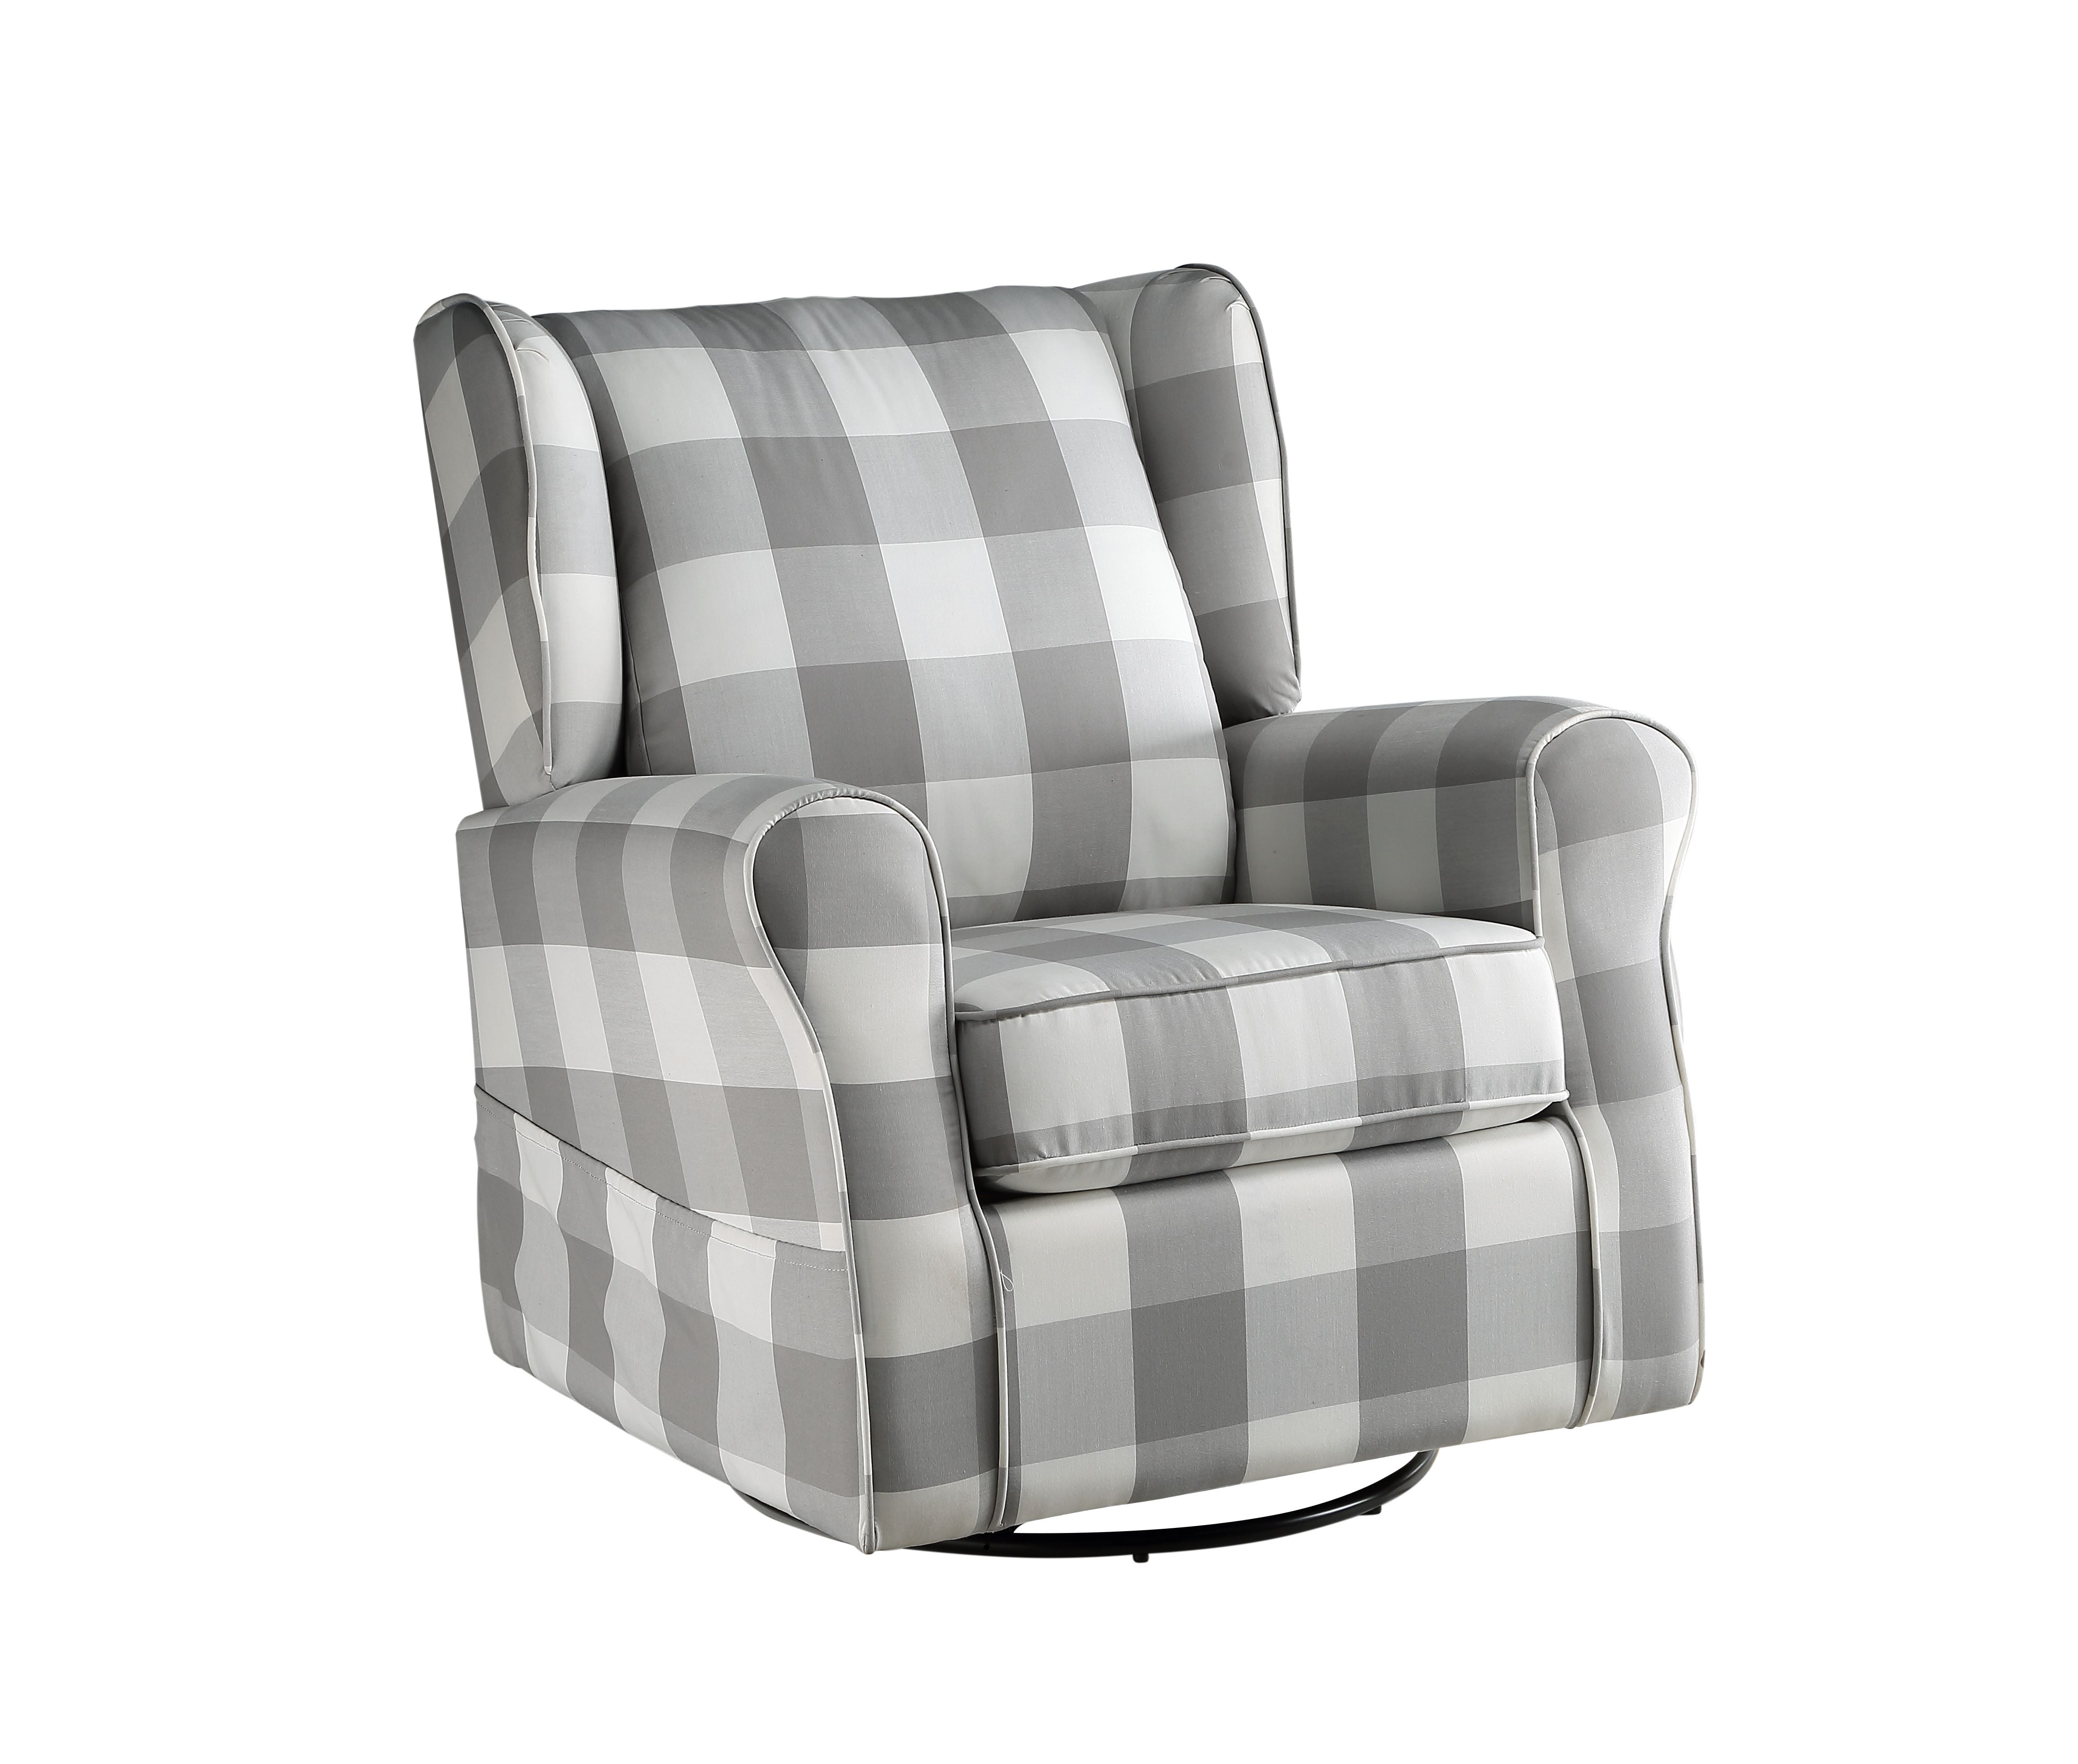 Picture of Acme Furniture LV00922 35 x 34 x 37 in. Patli Swivel Chair with Glider, Gray Fabric